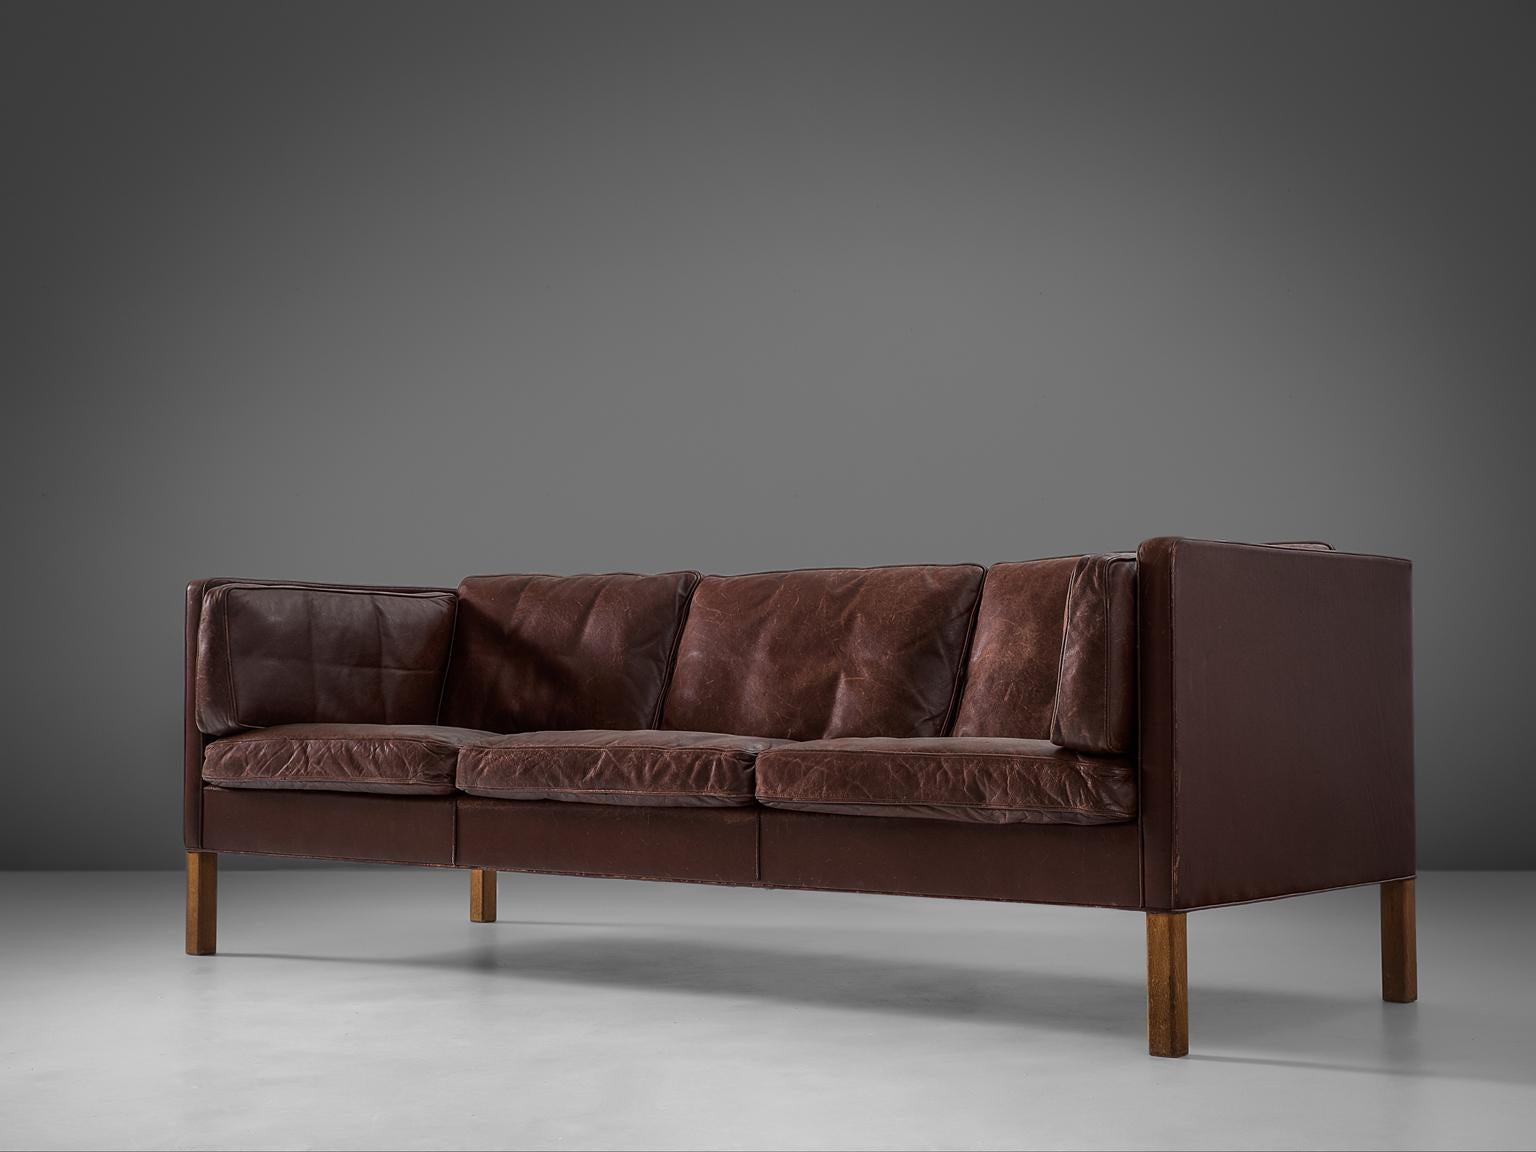 Børge Mogensen for Fredericia Stolefabrik, sofa model 2443, leather and oak, Denmark, 1960s.

This design comes from the 1960s and has wonderful shapes and comfort. The three-seater sofa comes with loose cushions in seating, back and sides. They